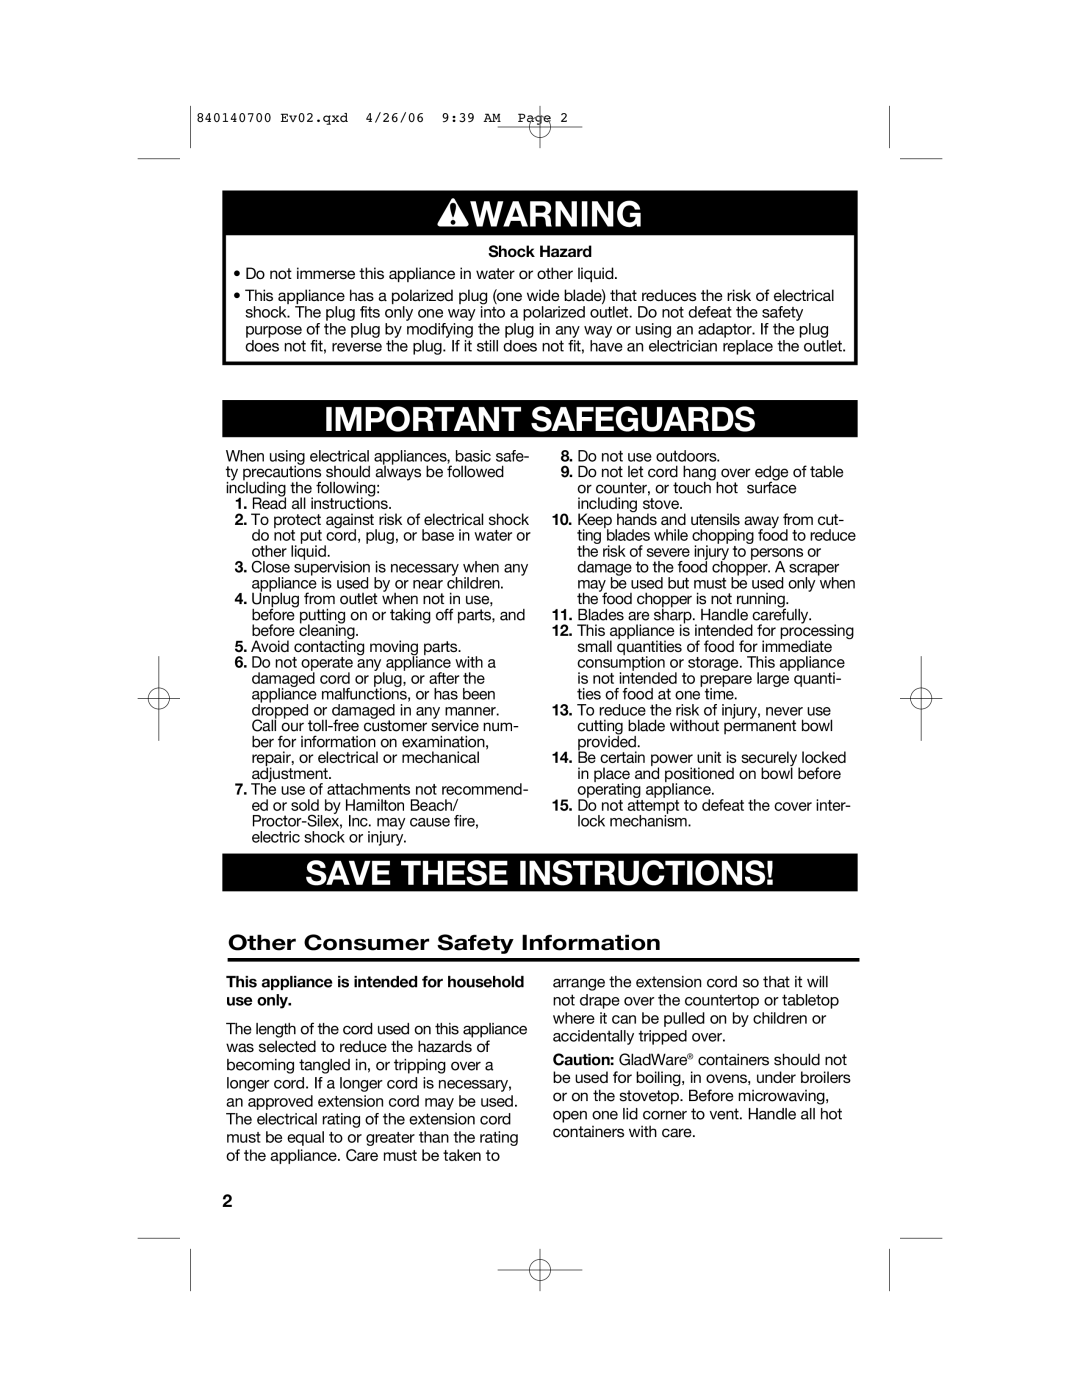 Hamilton Beach 72850 manual wWARNING, Important Safeguards, Save These Instructions, Other Consumer Safety Information 